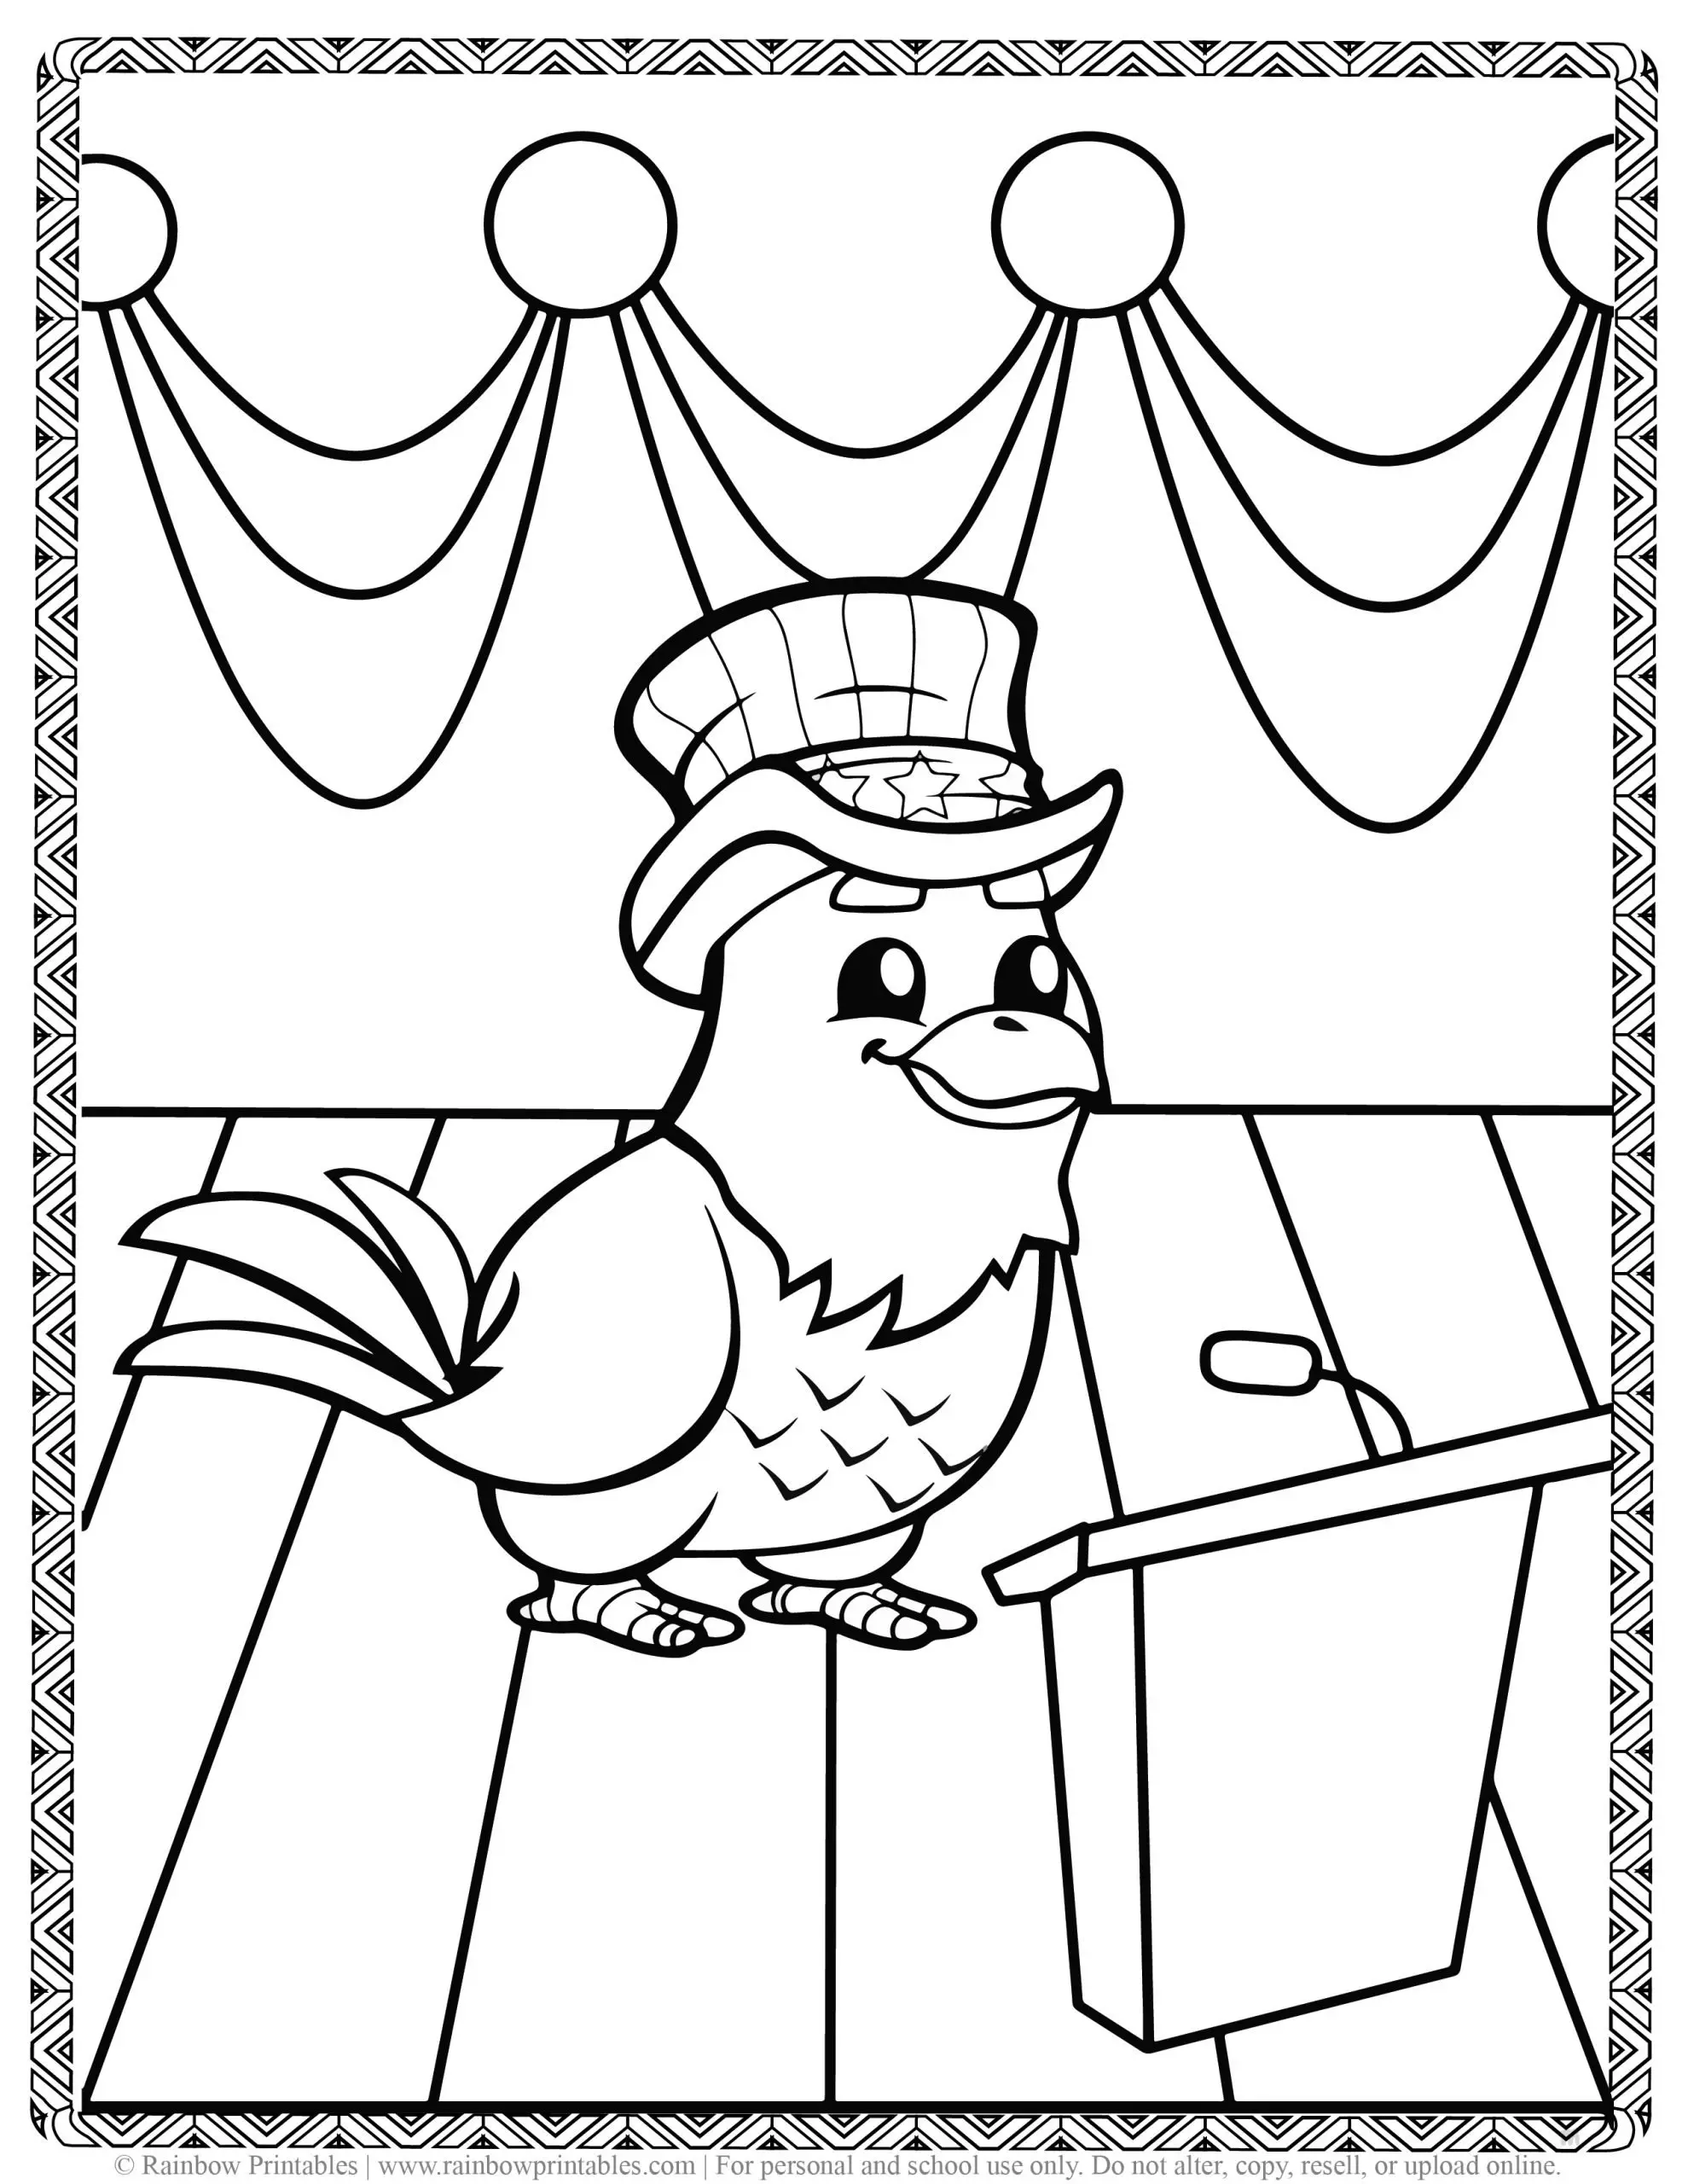 Celebrate Freedom with 4th of July: 180+ Free Coloring Pages 75